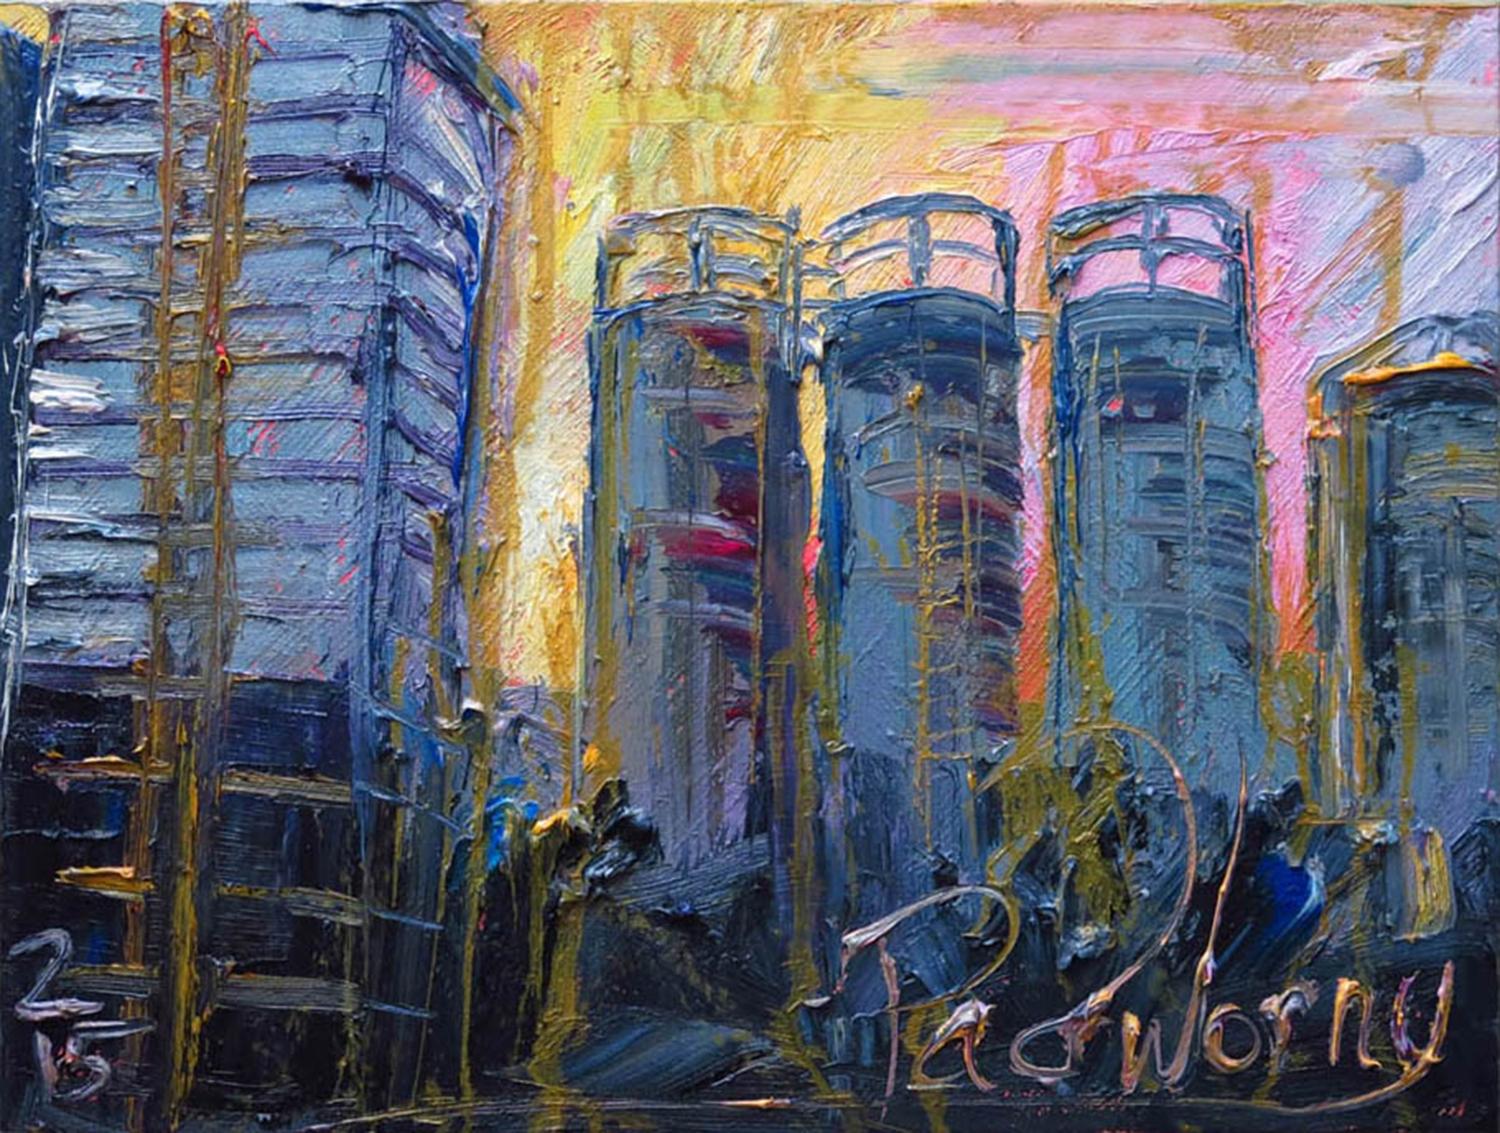 Original Oil Painting on Gallery wrapped stretched canvas of 24 by 18 by 3/4 in.. UNTITLED x1042.To see video of this painting, search on YouTube for: "Original Oil Painting x1042". Landscape Art NewYork Cityscape . :: Painting :: English :: This